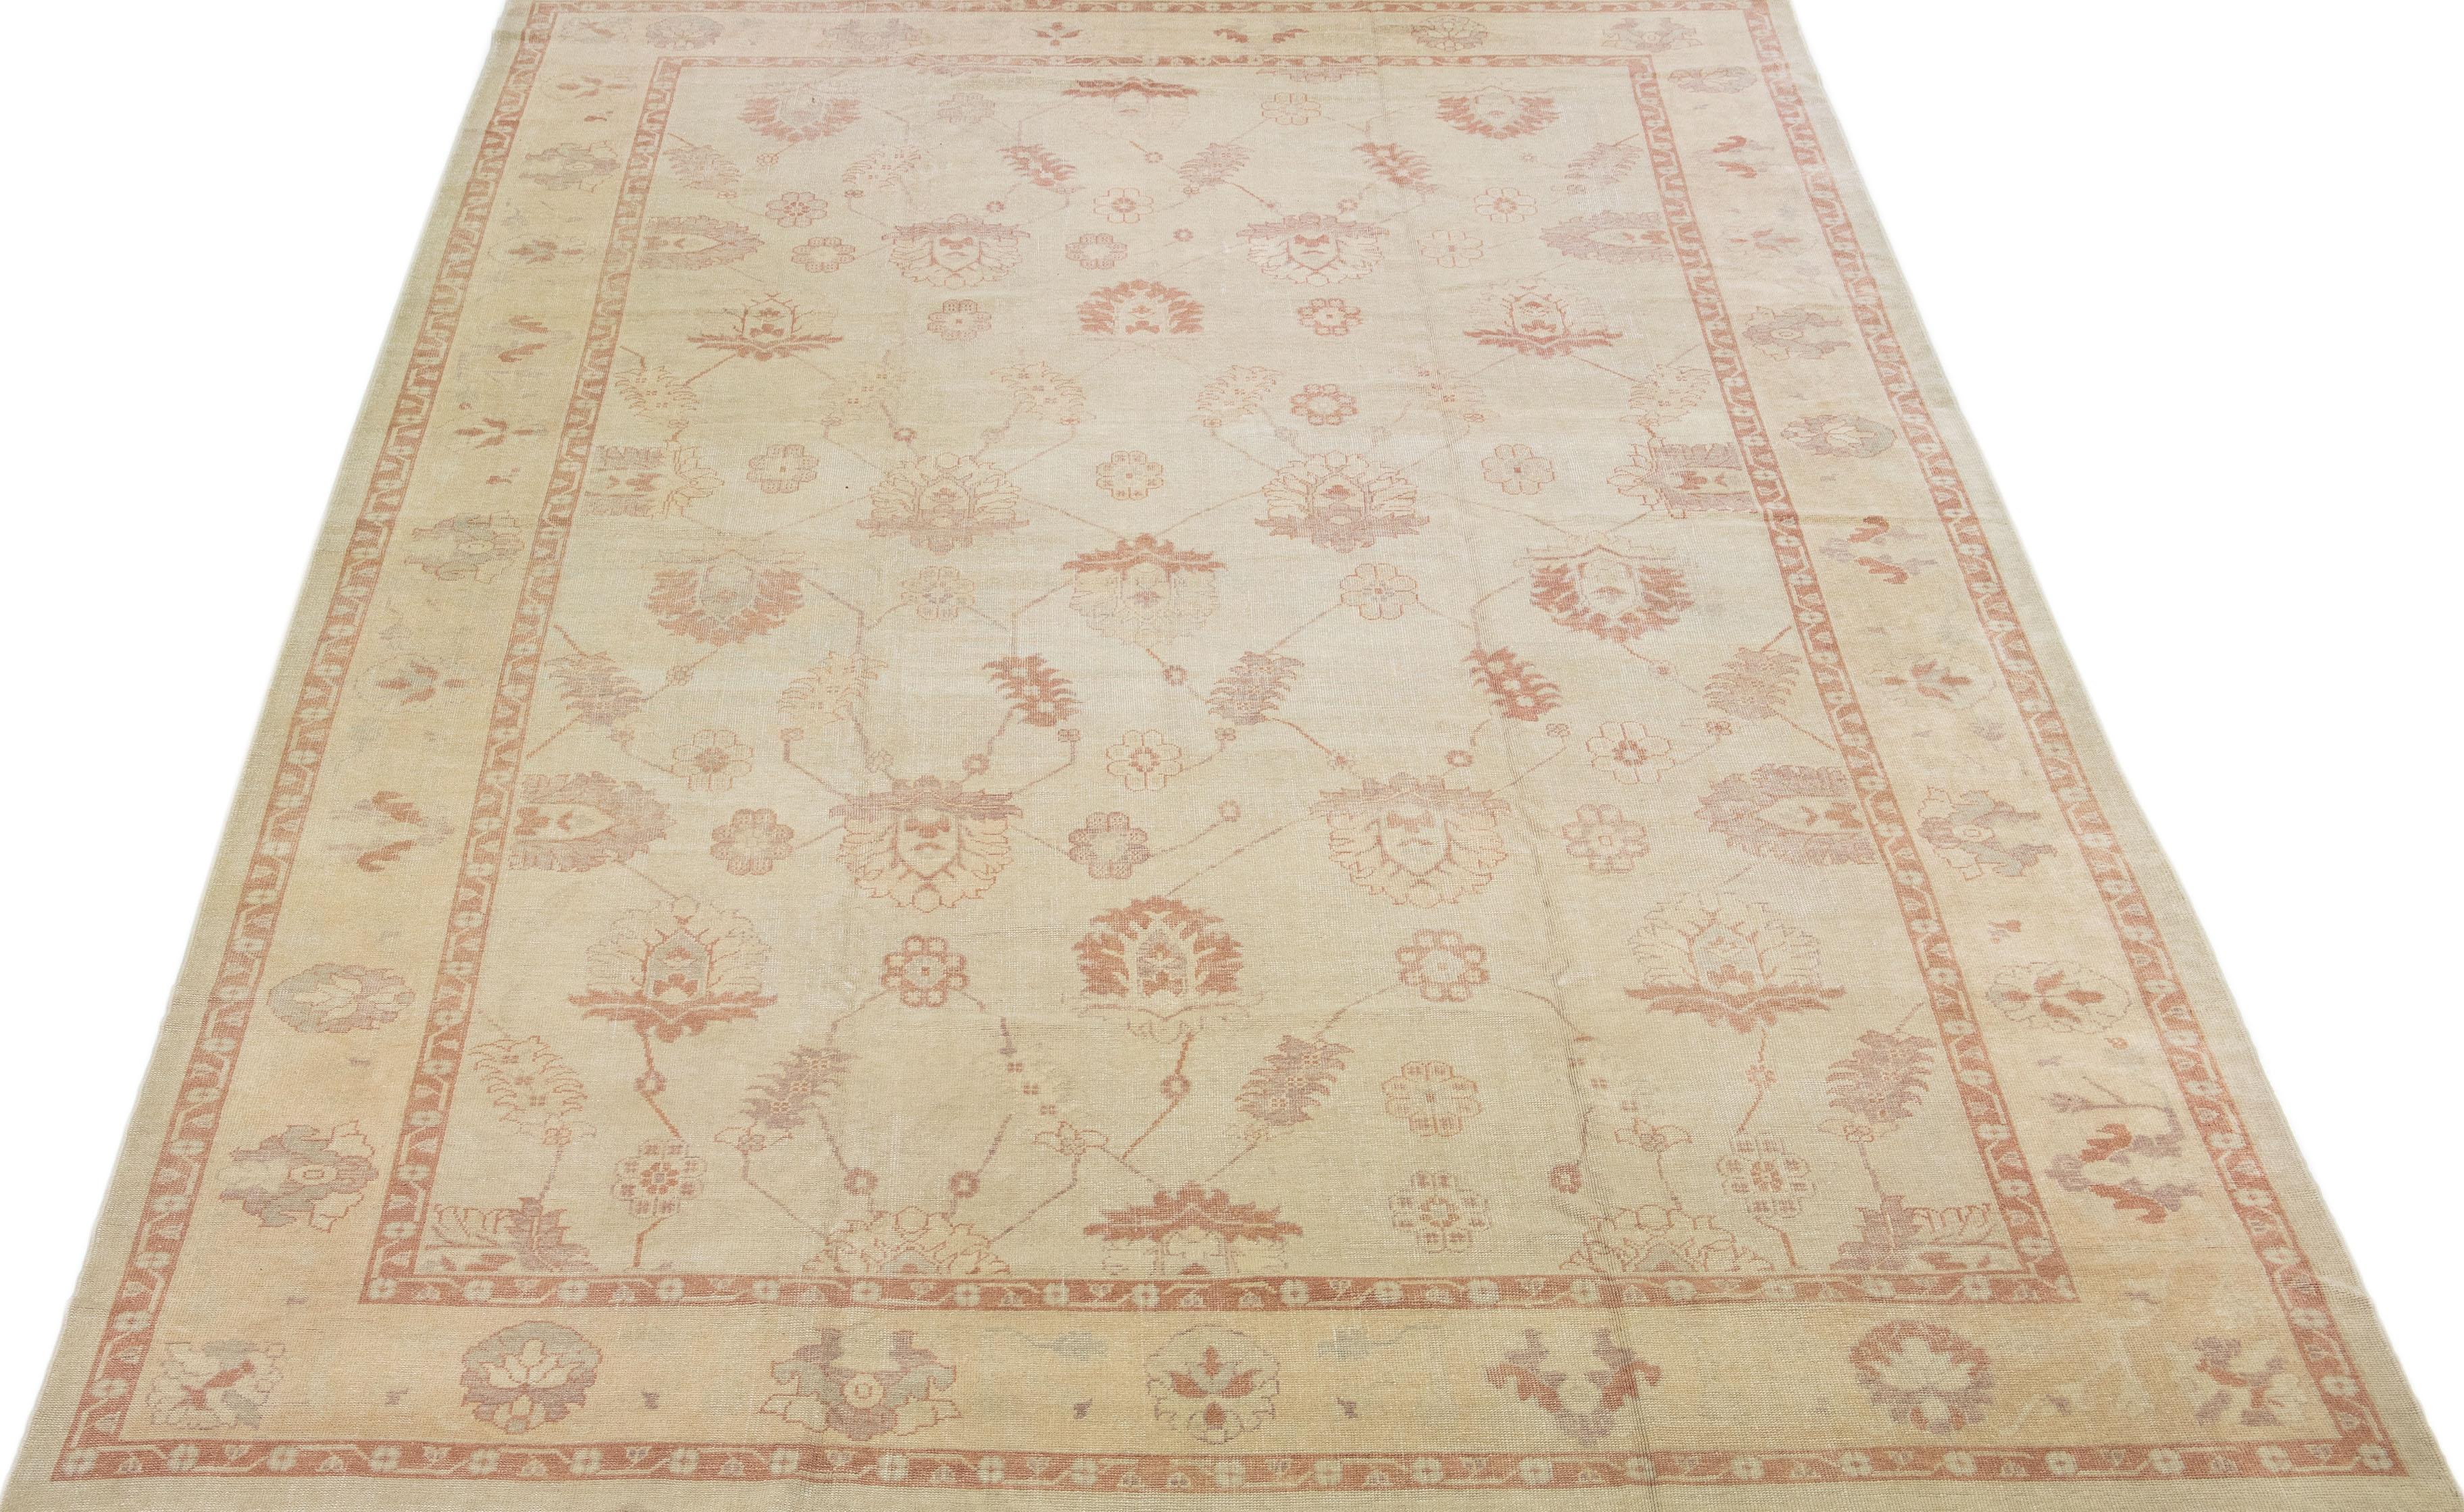 Beautiful modern Turkish hand-knotted wool rug with a beige color field. This rug has a designed frame with accent colors of orange-rust in a gorgeous all-over floral design.

This rug measures: 12' x 19'.